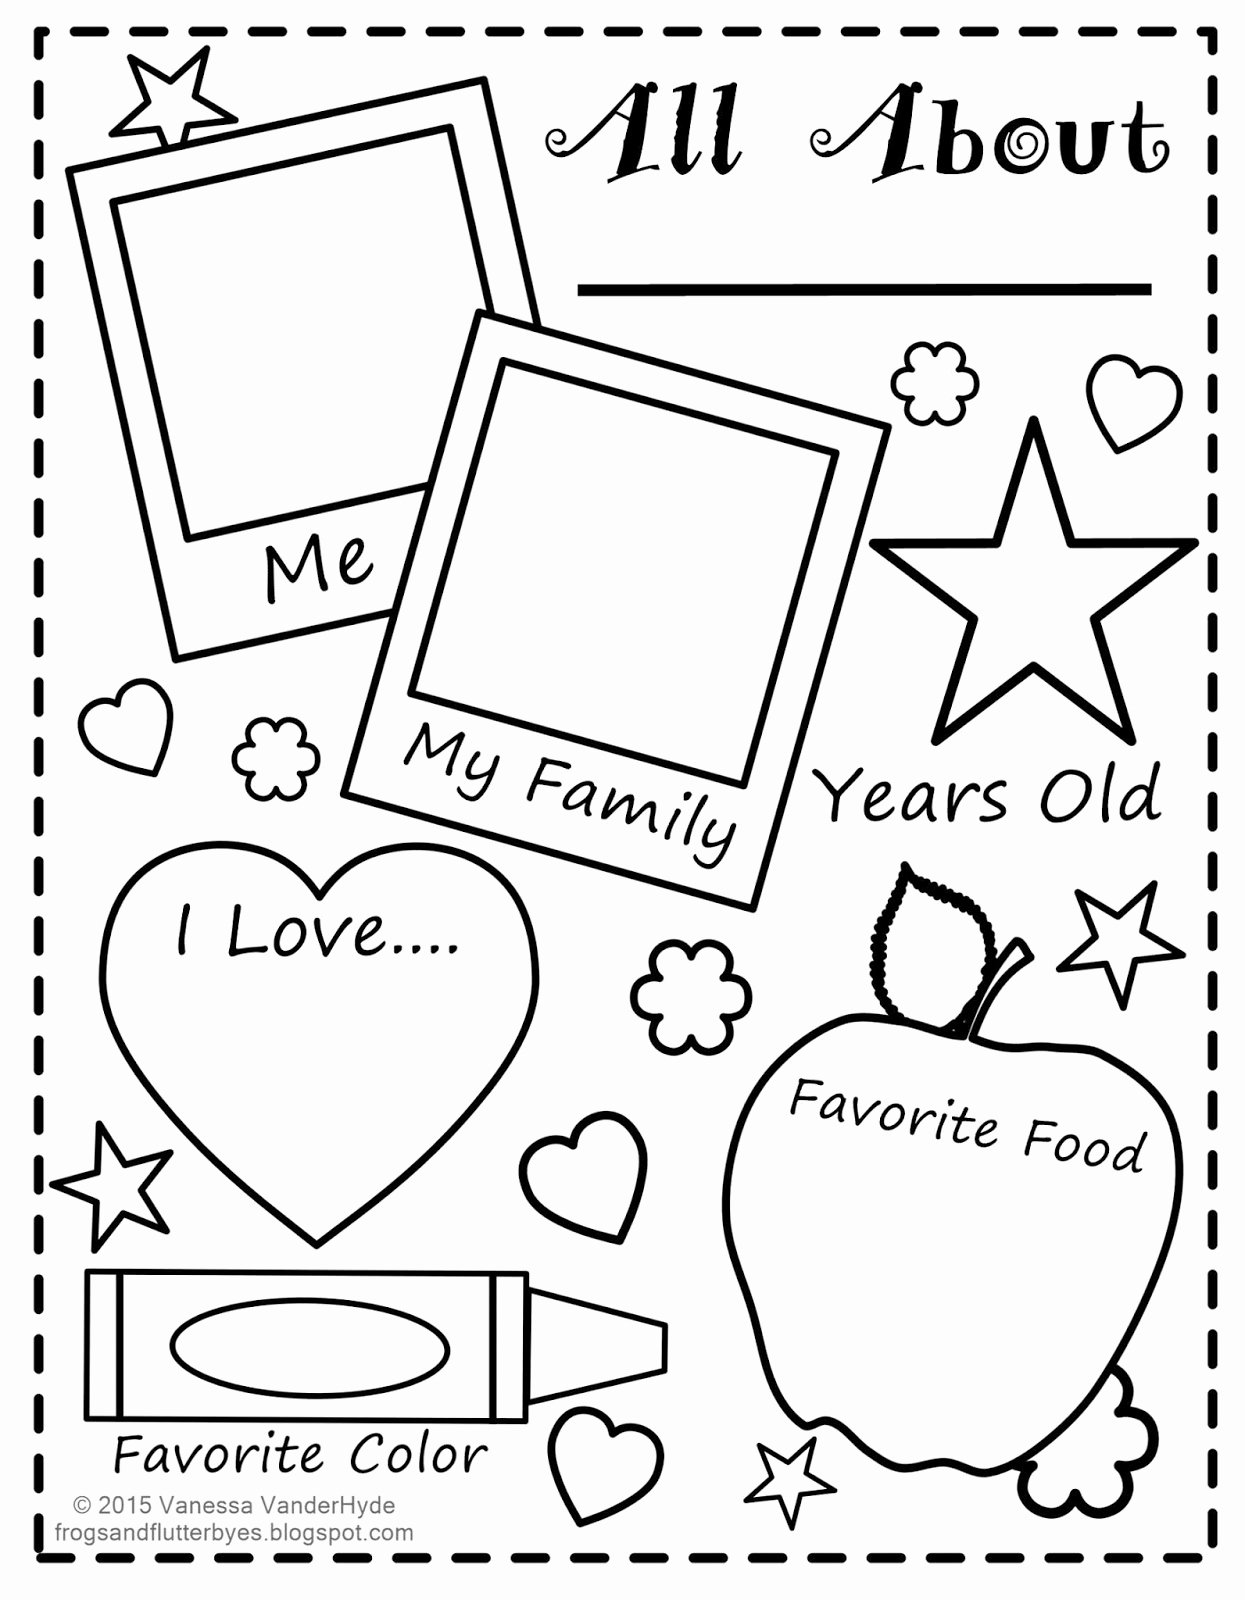 All About Me Worksheet Luxury the Frogs and the Flutterbyes All About Me Free Printable